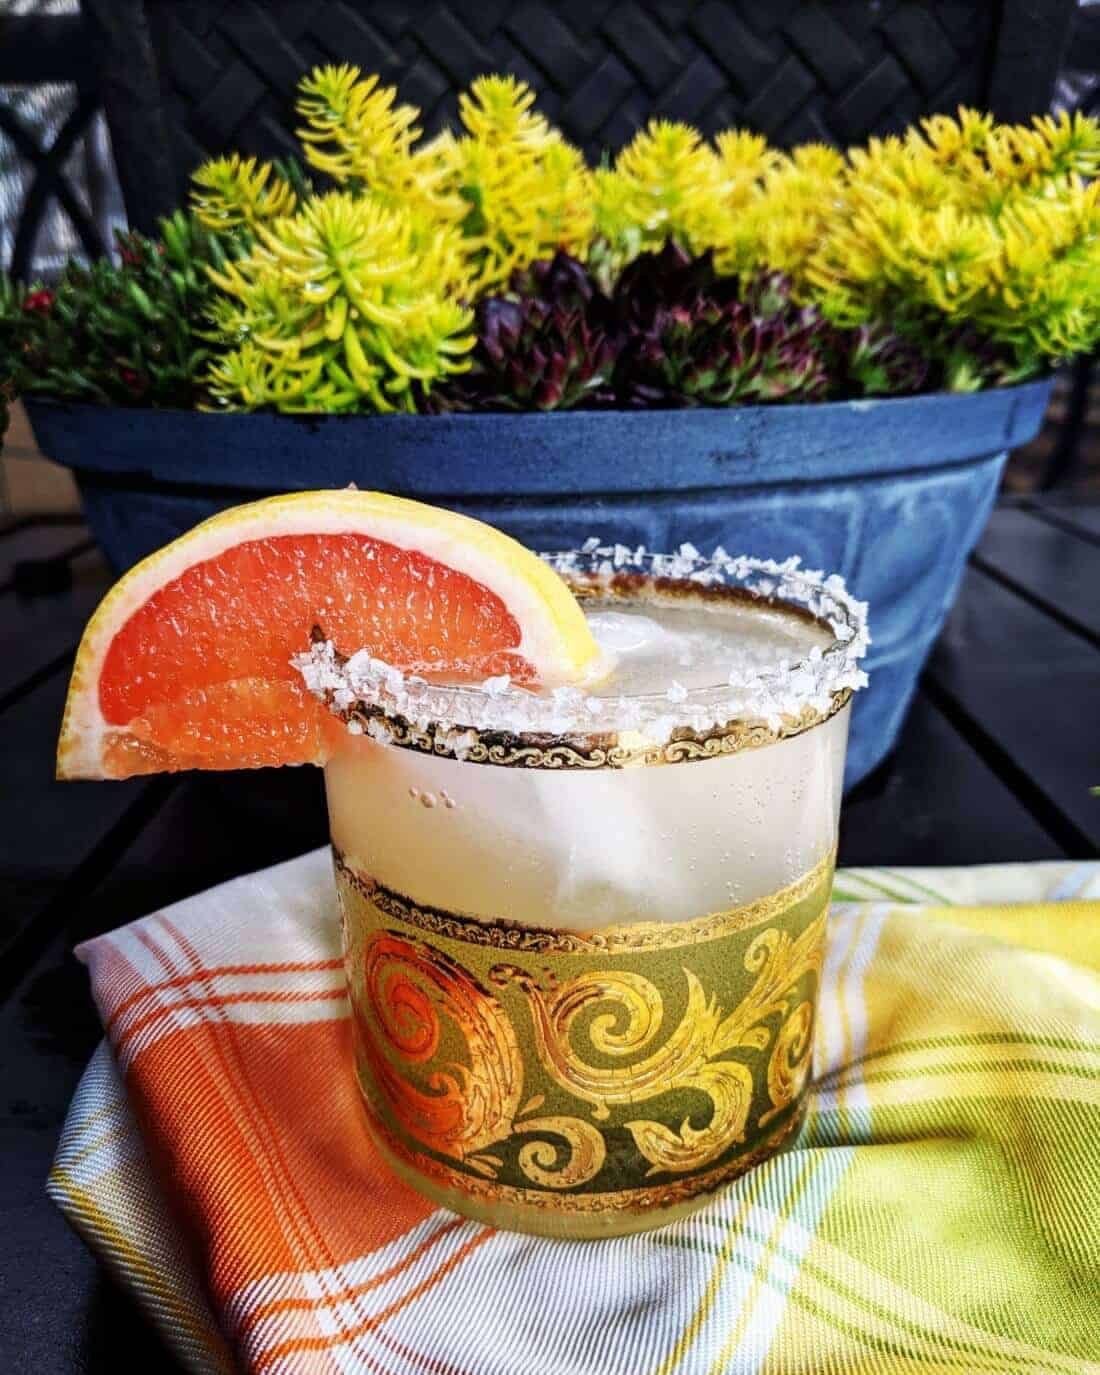 https://www.thekitchenmagpie.com/wp-content/uploads/images/2019/05/Paloma-Cocktail-Garnished-1100x1375.jpg